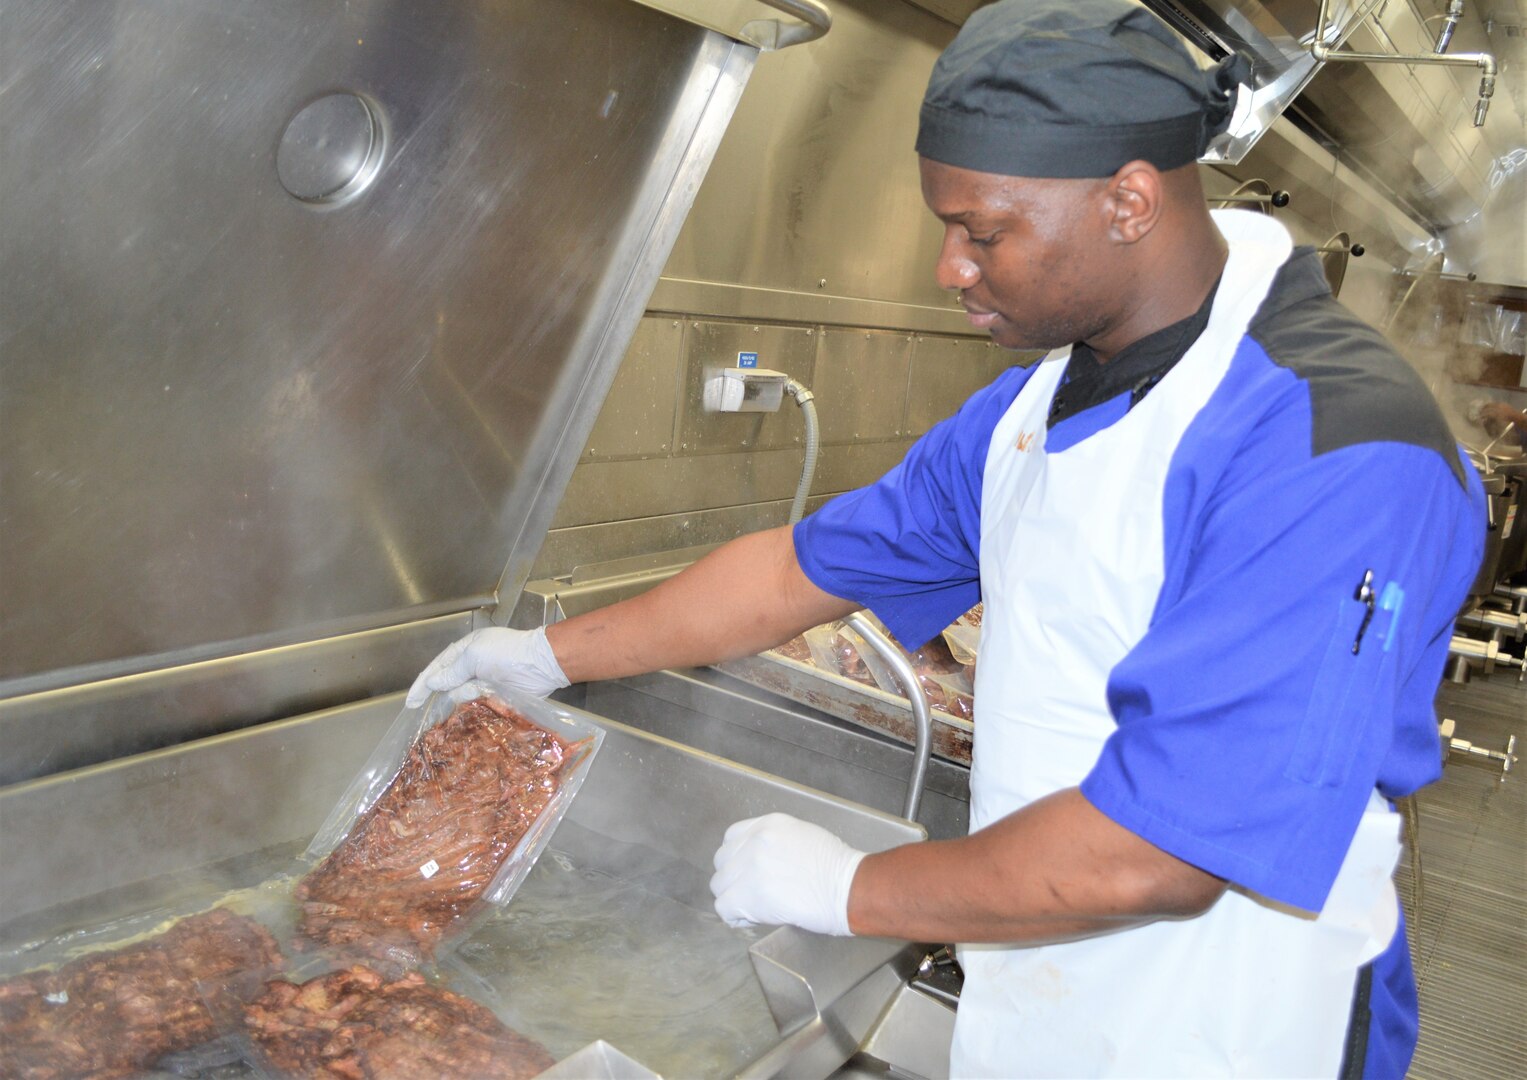 Anthony Carter, a cook at Brooke Army Medical Center’s dining facility, warms food up to the proper temperature in order to begin preparing it for lunch June 21. BAMC earned three Practice Greenhealth Environmental Awards at the CleanMed2019 conference, including its first Circle of Excellence – Chemicals Award, for its overall commitment to environmental stewardship and sustainability practices.